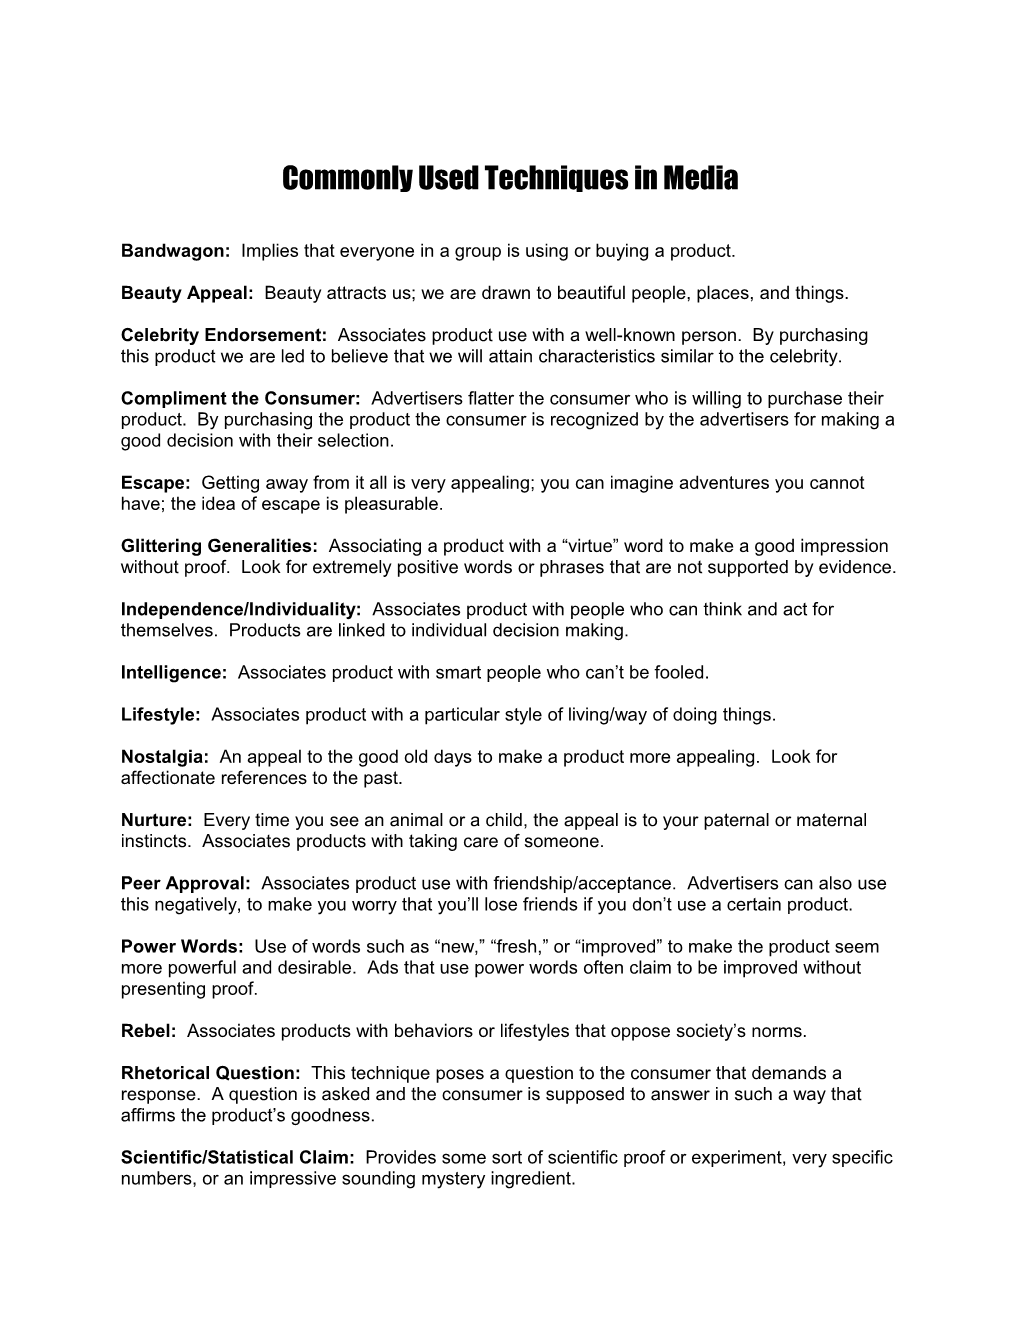 Glossary of Commonly Used Techniques